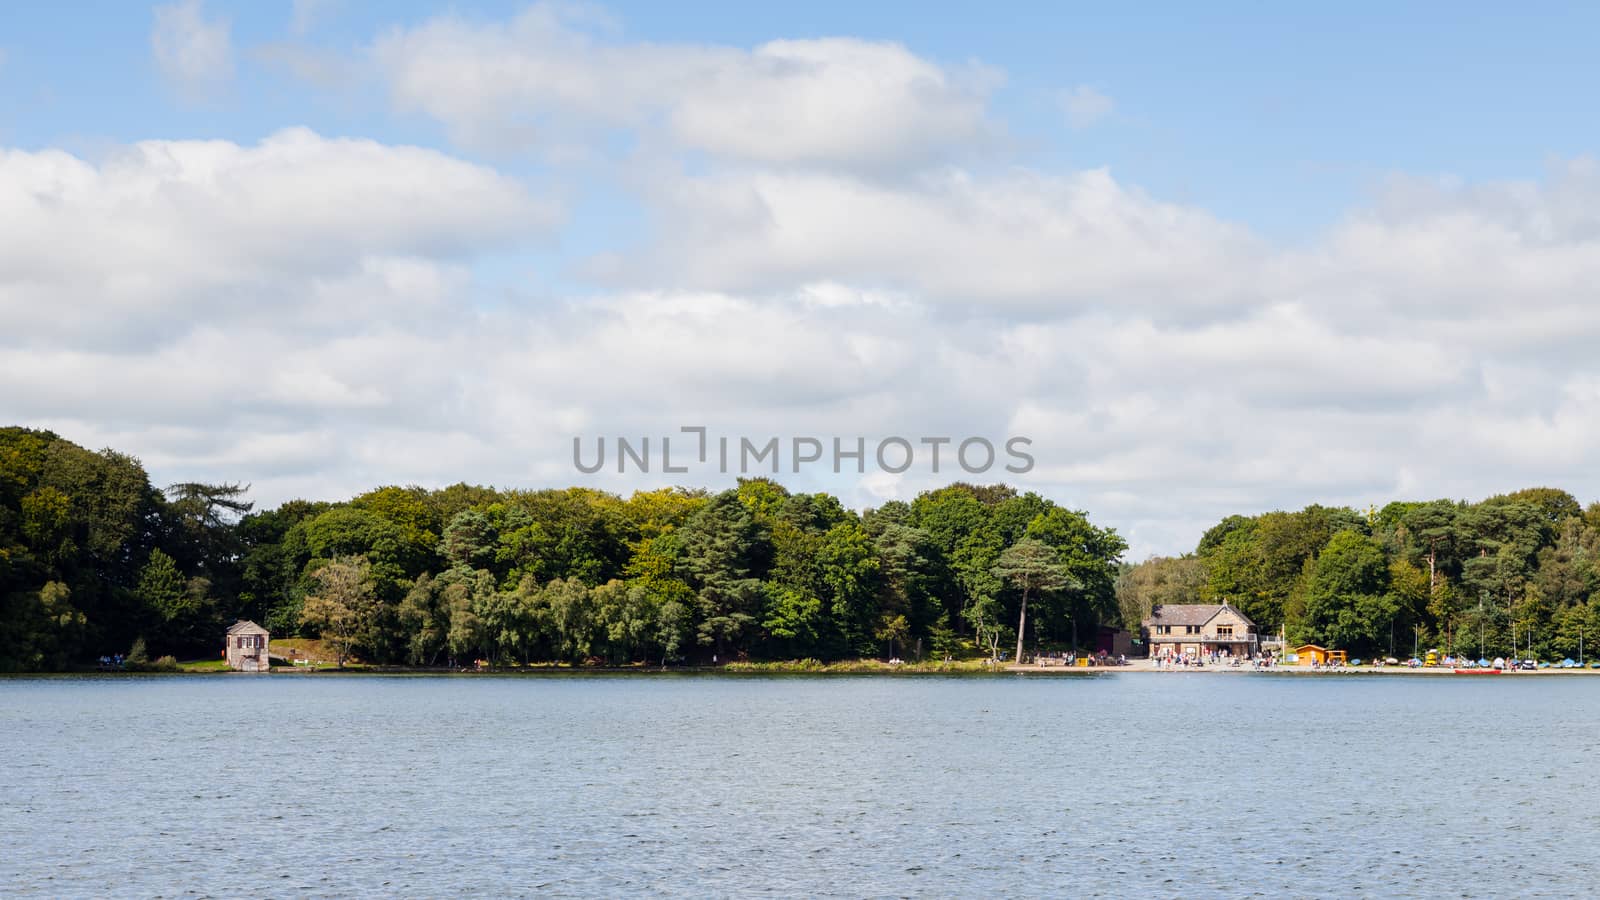 The view across Talkin Tarn, Cumbria in northern England.  The tarn is a glacial lake and country park close to the town of Brampton.